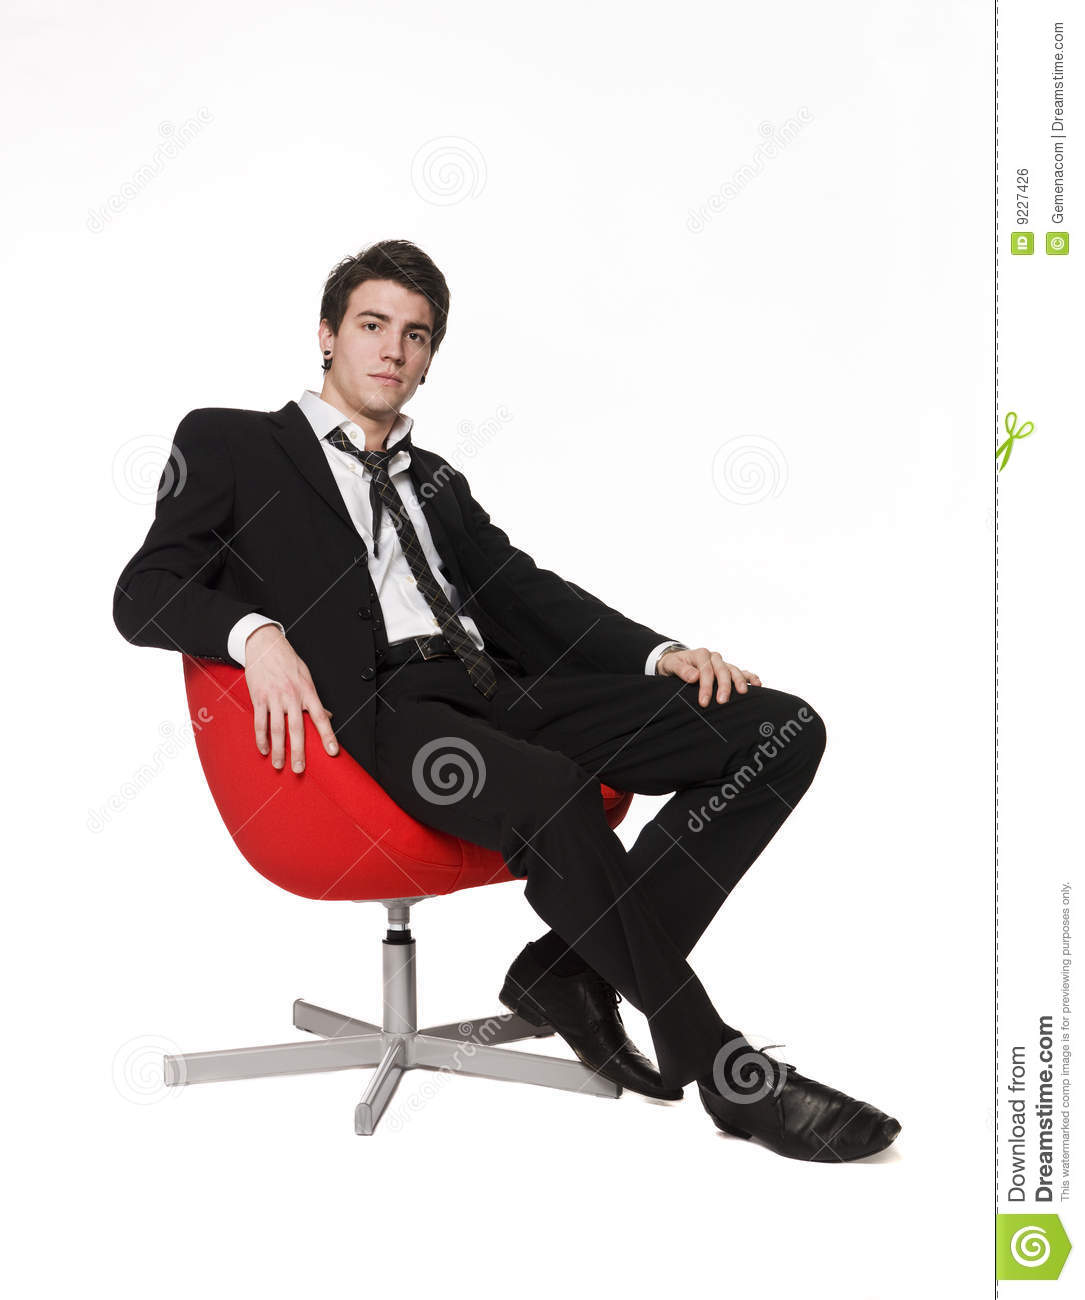 Man In Red Armchair Royalty Free Stock Image   Image  9227426